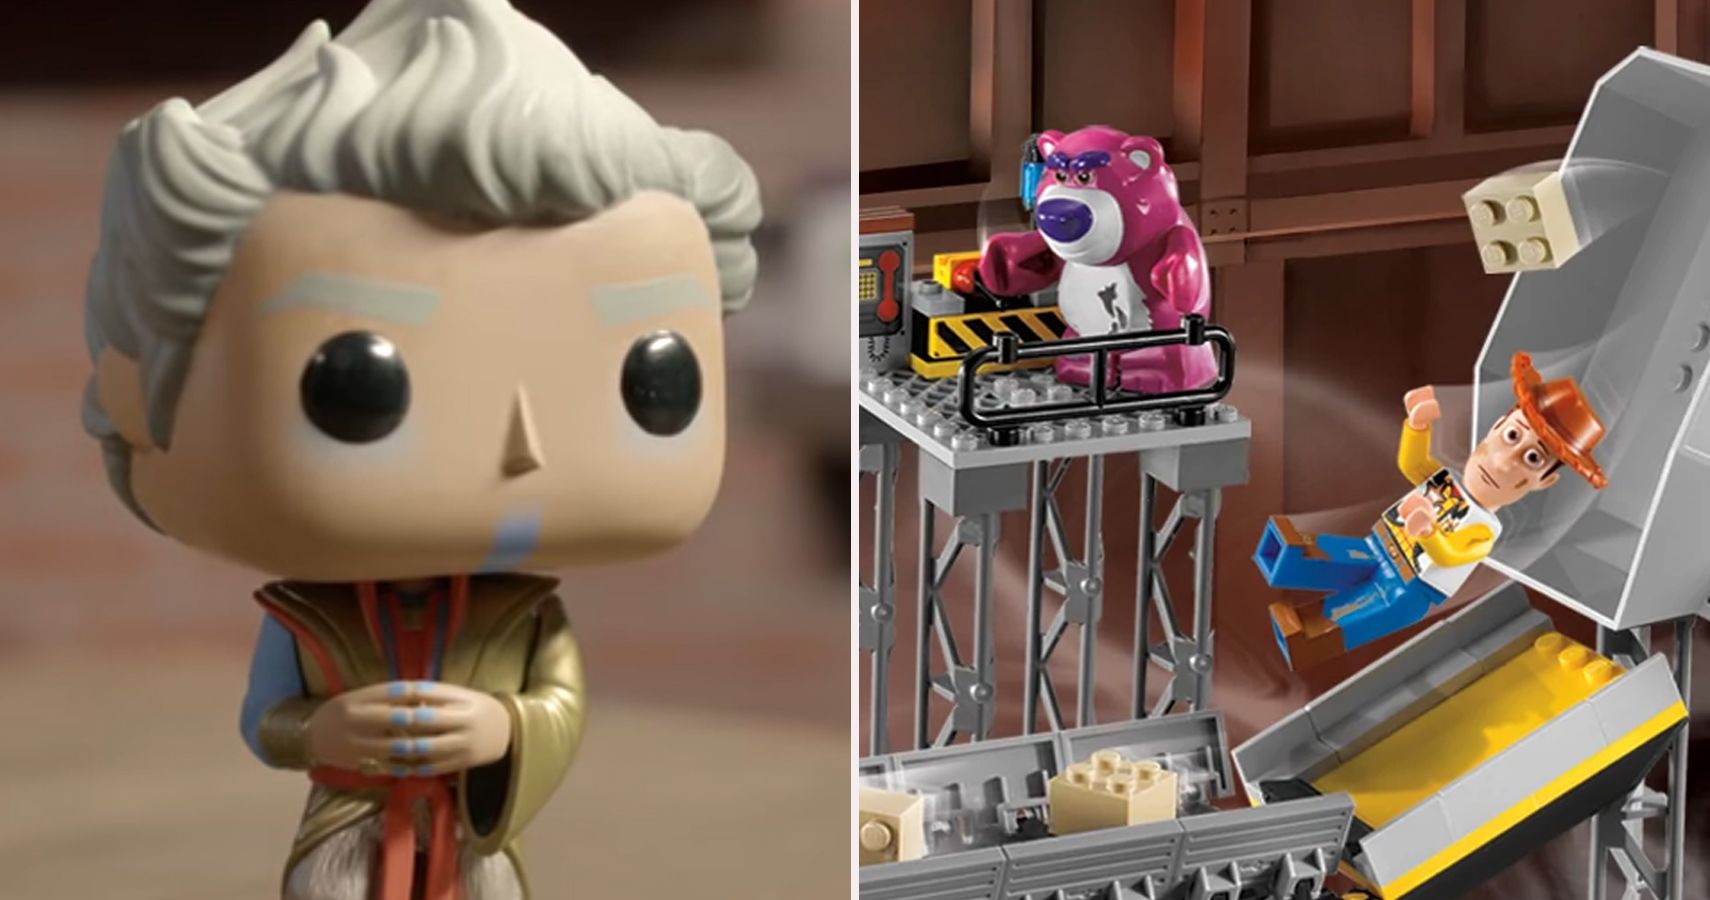 Funko POP! Vinyls Unmasked Star-Lord Review & Photos - Marvel Toy News